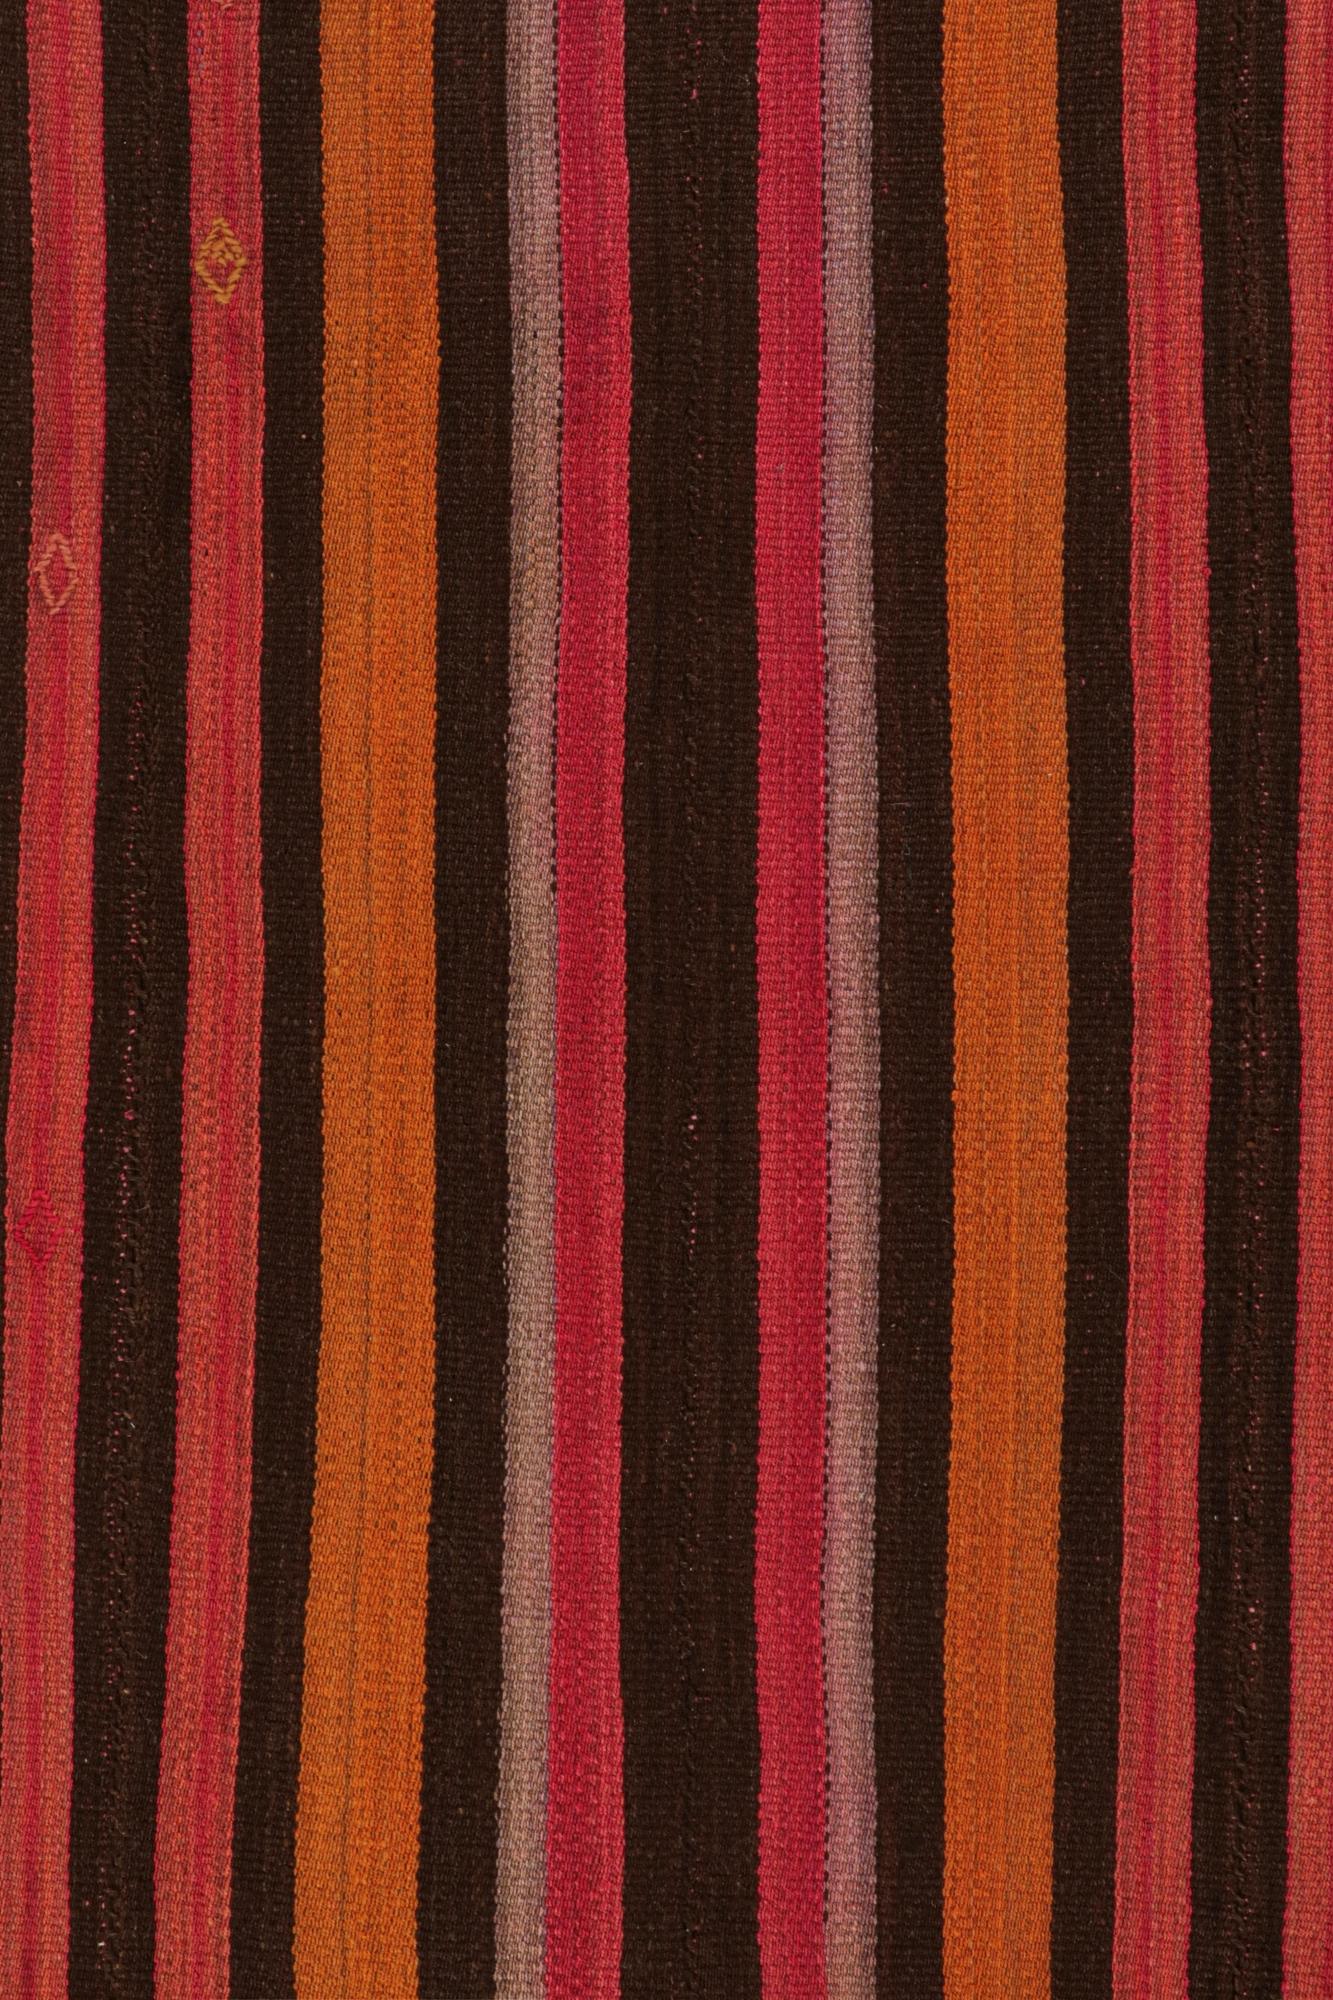 Mid-20th Century Vintage Persian Kilim with Orange, Brown and Pink Stripes For Sale